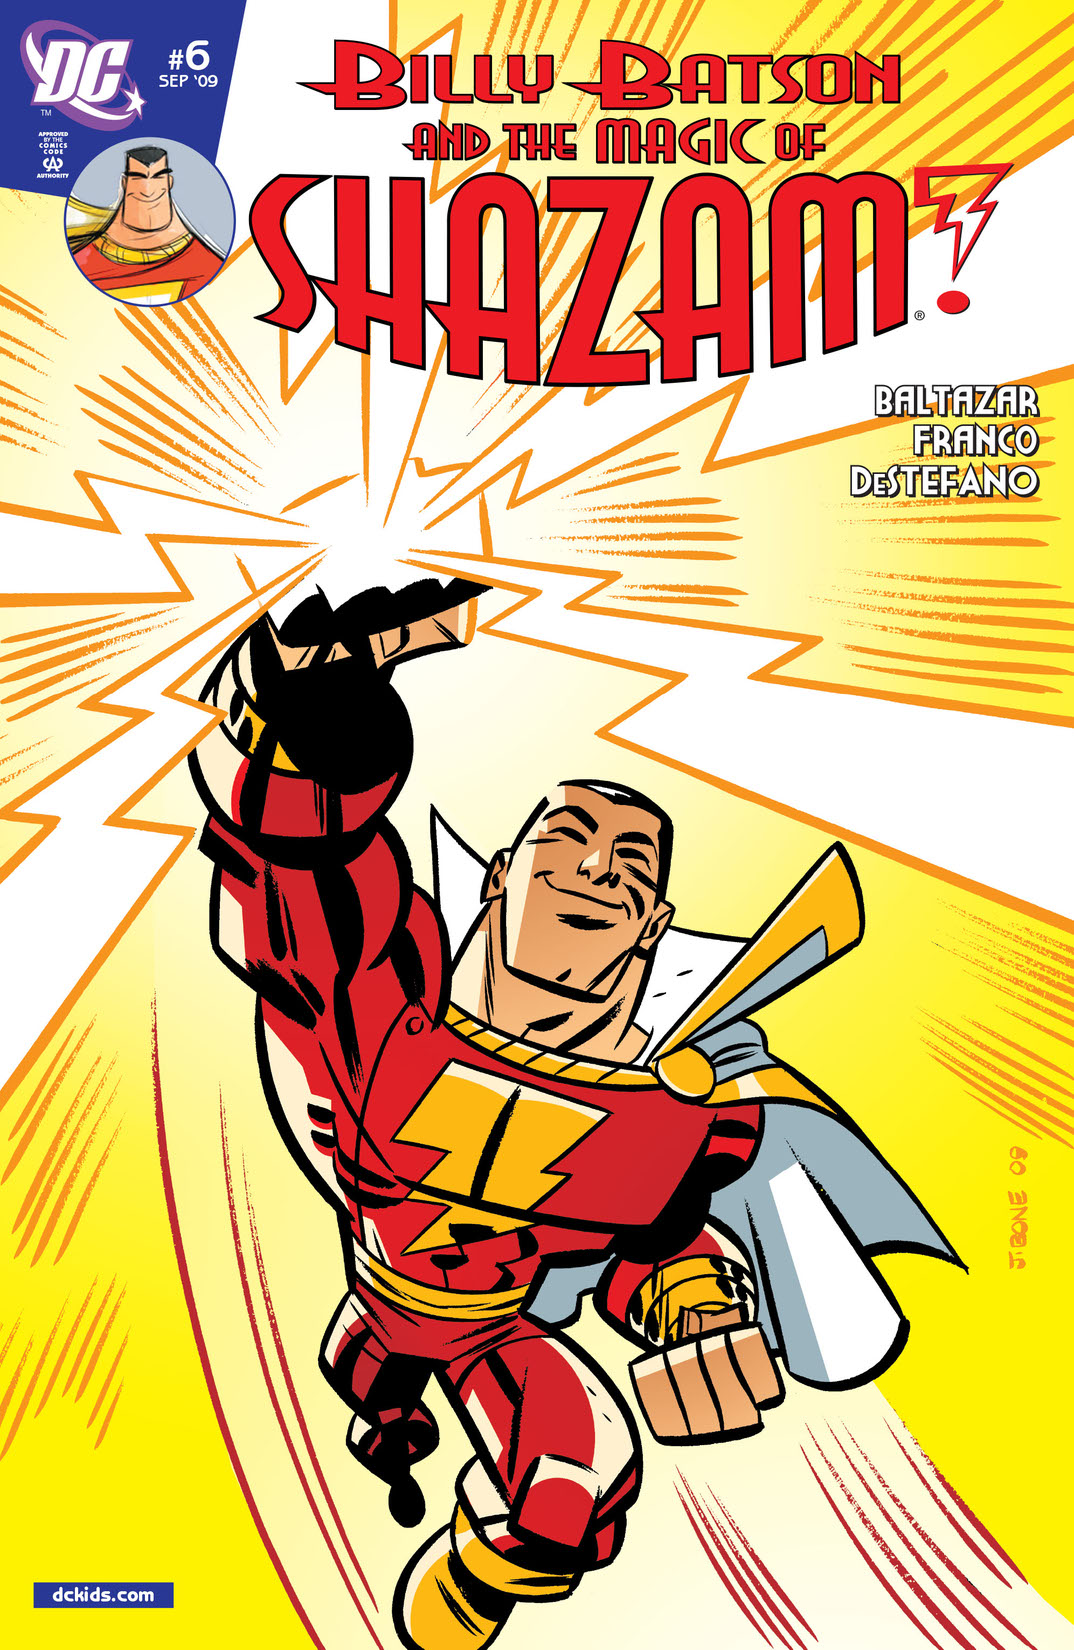 Billy Batson & the Magic of Shazam! #6 preview images